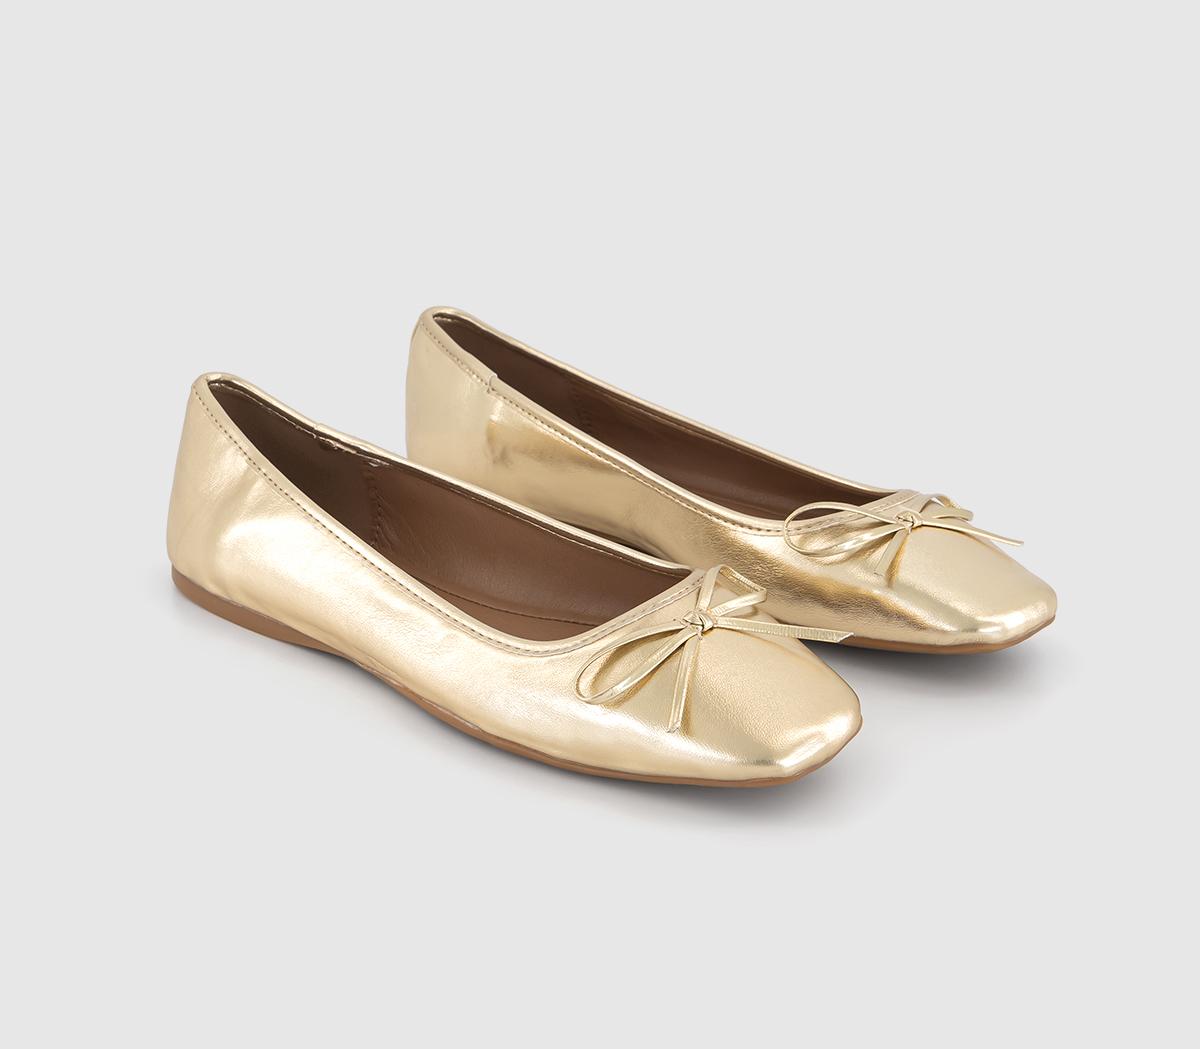 OFFICE Womens Five Star Square Toe Ballerina Shoes Gold Metalic, 3